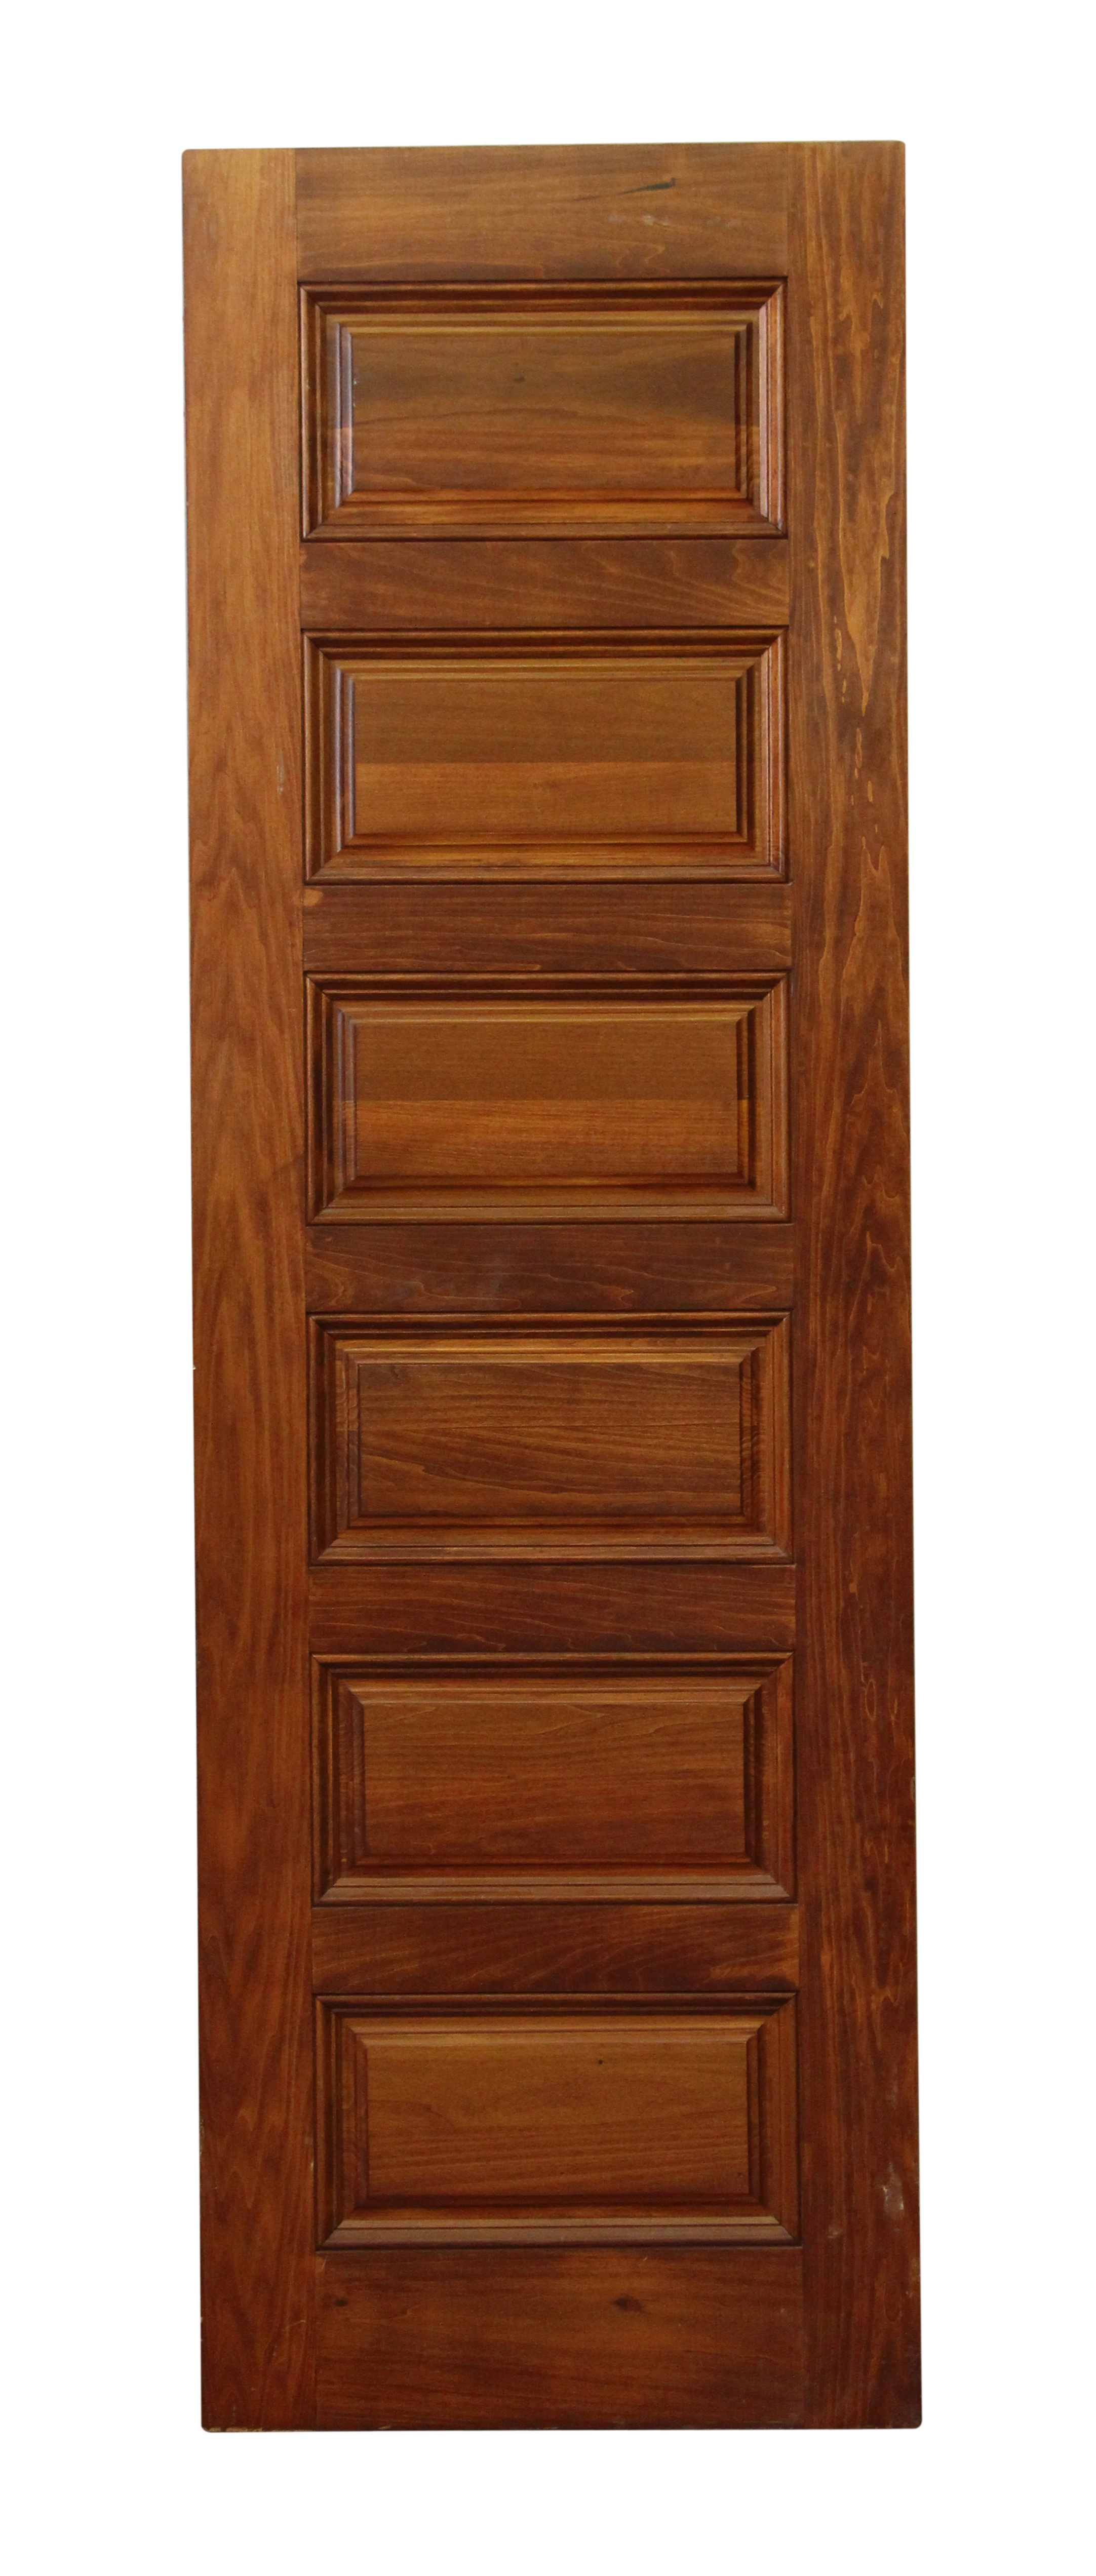 Old Extra Tall Six Panel Wooden Door | Olde Good Things